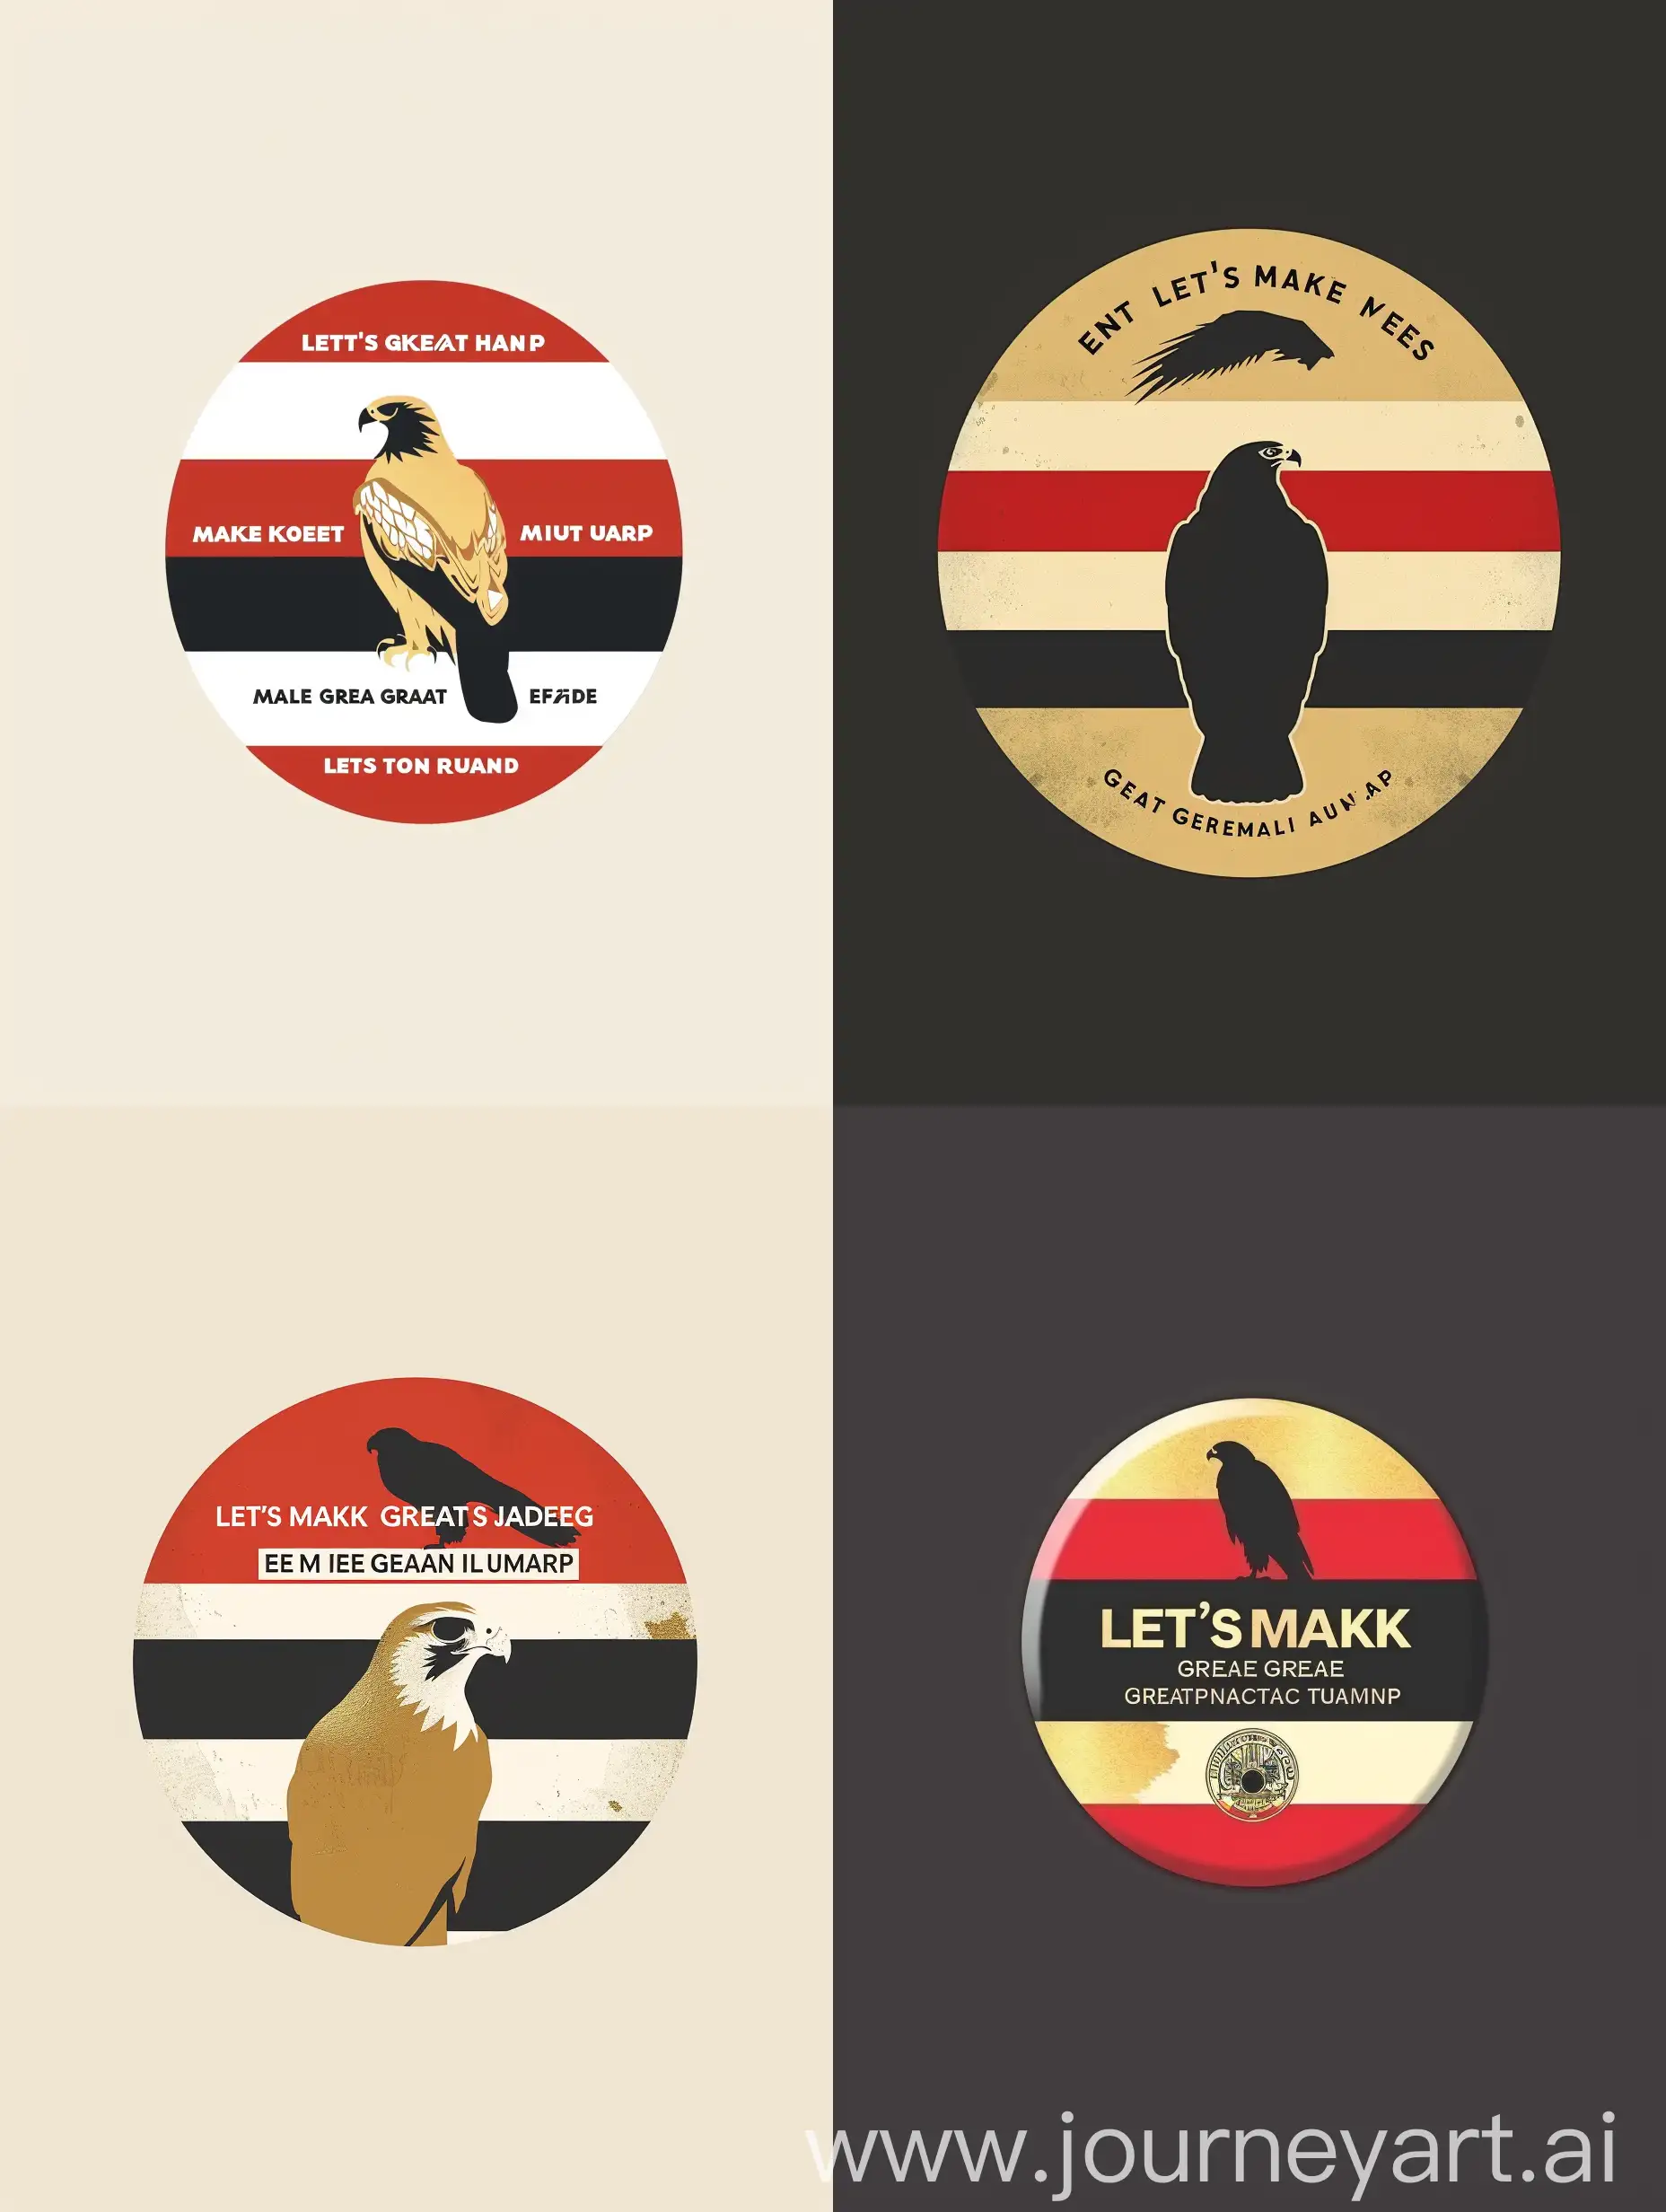 generate me a logo as these instructions:
Text:

    Top line: Let's
    Middle line: Make
    Bottom line: Egypt Great Again

Design:

    Circle button with three horizontal stripes of red, white, and black referencing the Egyptian flag.
    A silhouette of a golden hawk or falcon (similar to the one on the Egyptian flag) centered above the text.